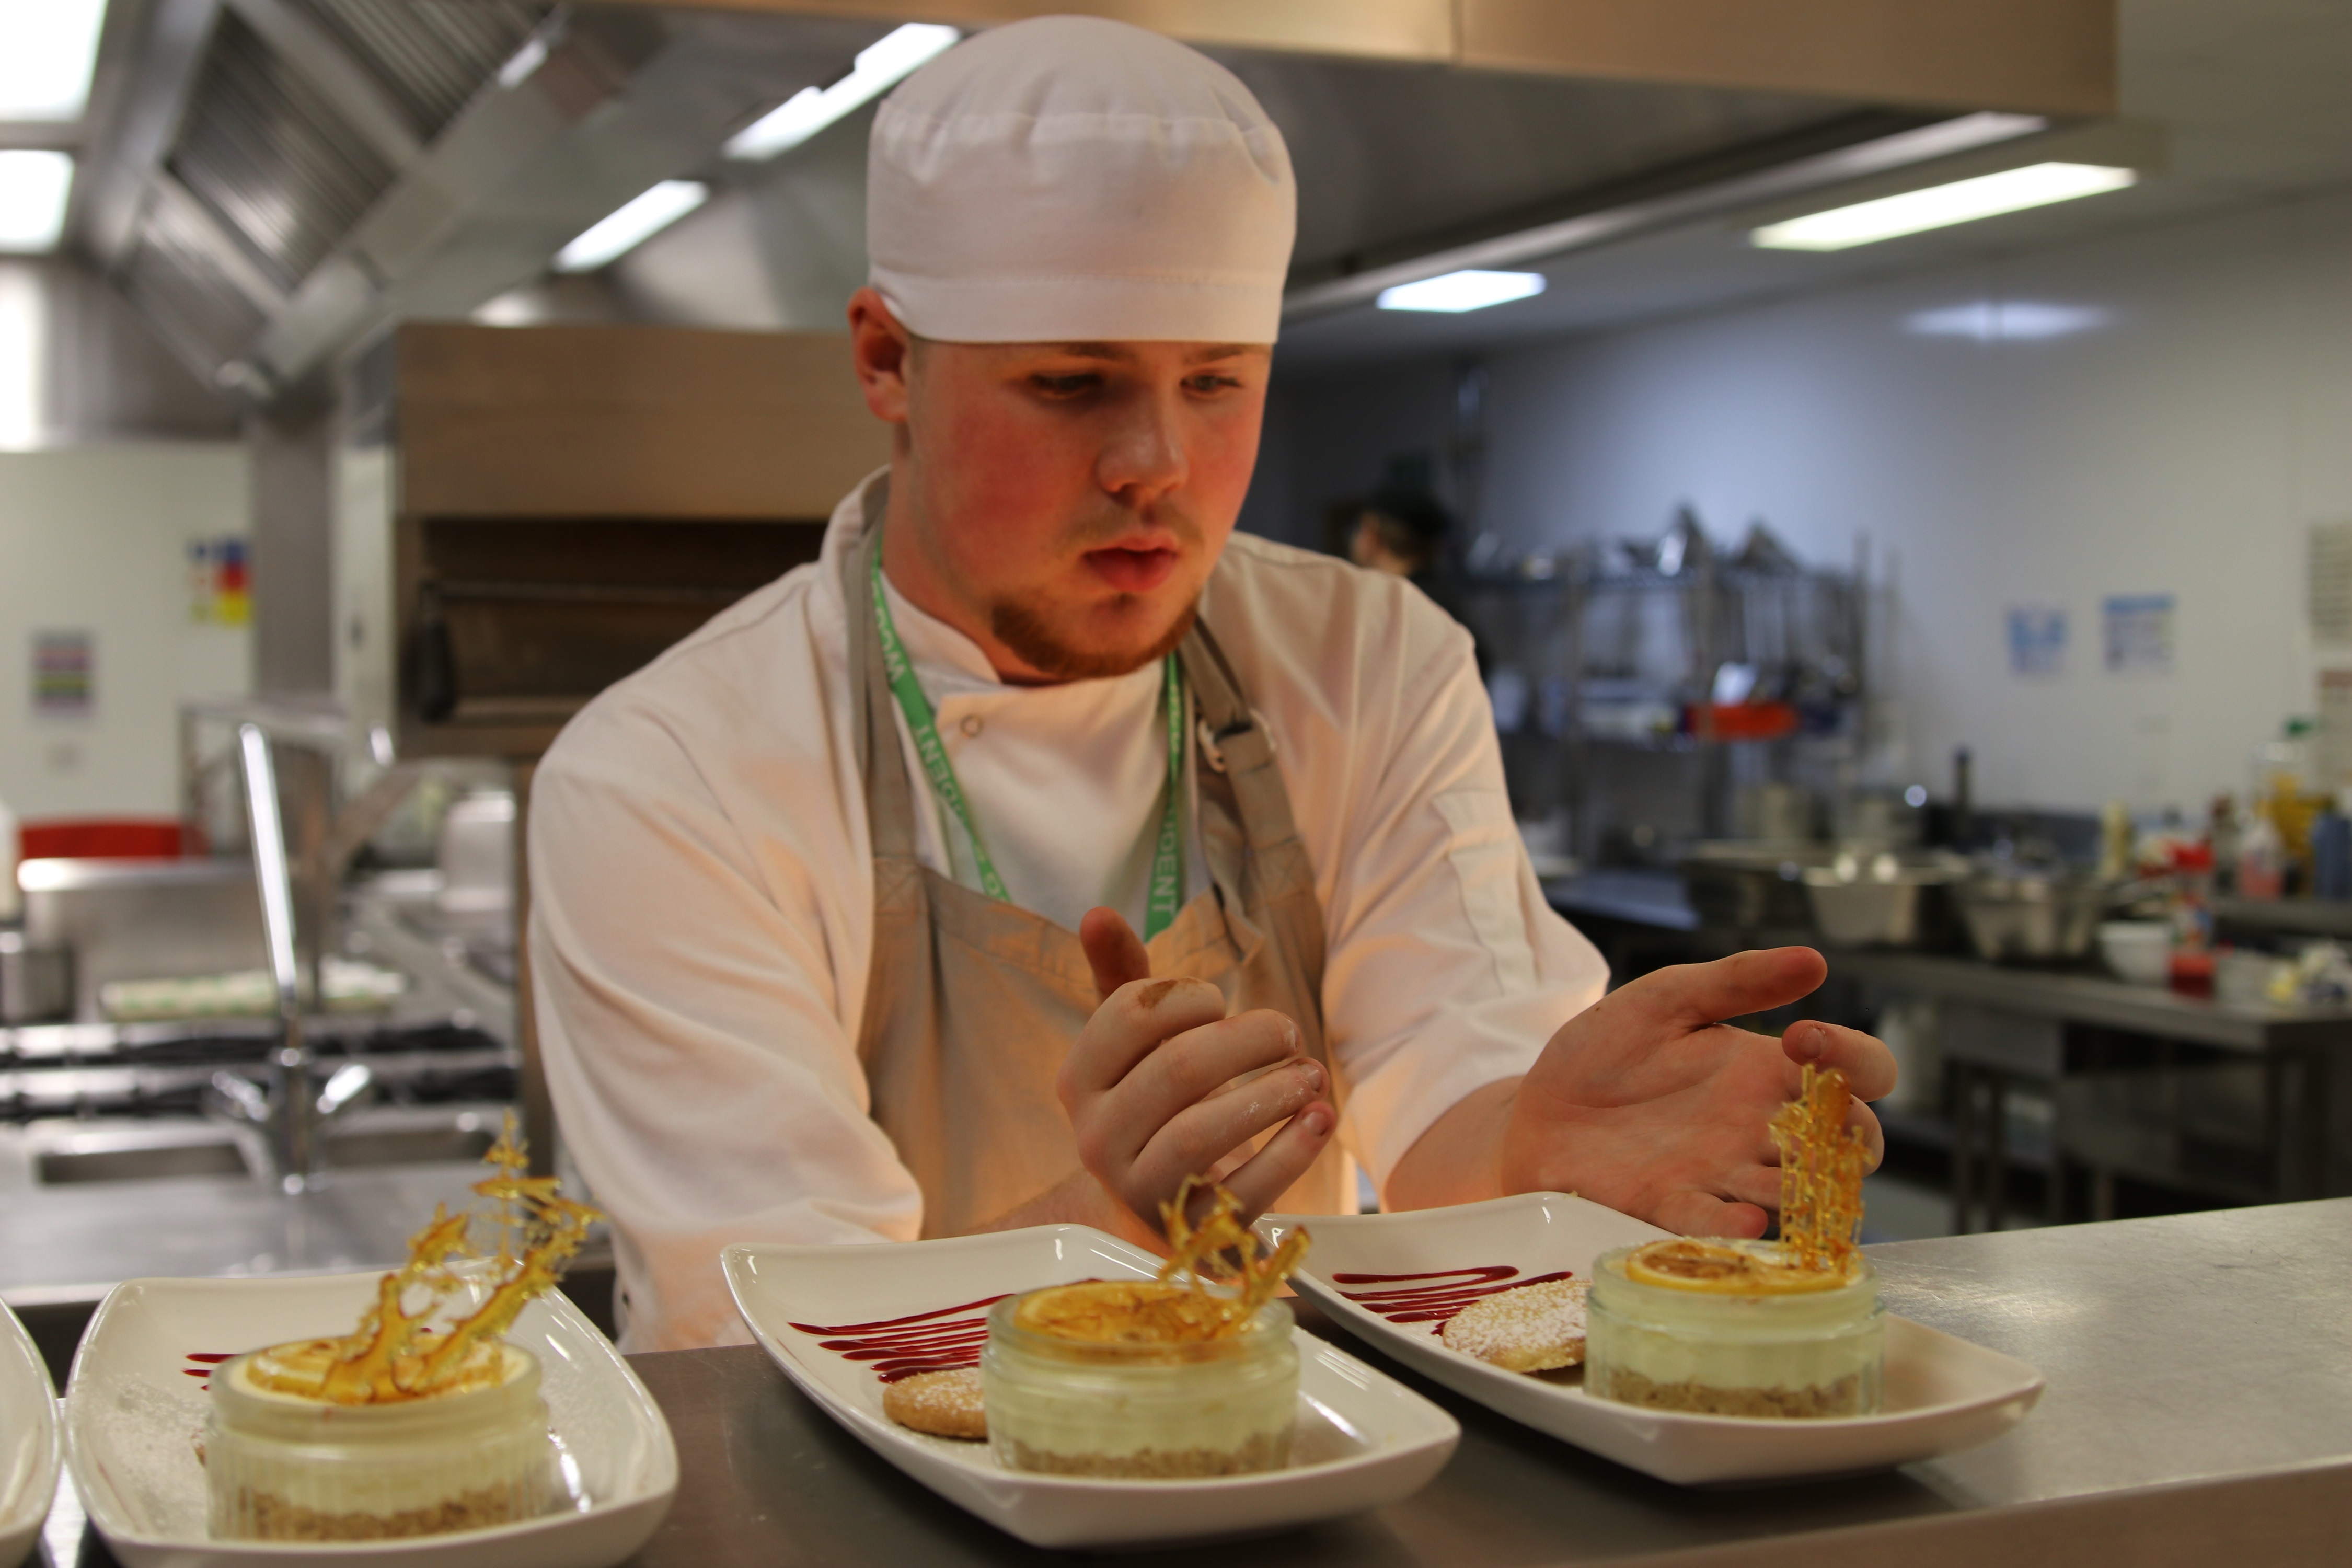 Catering students to host celebratory Coronation lunch